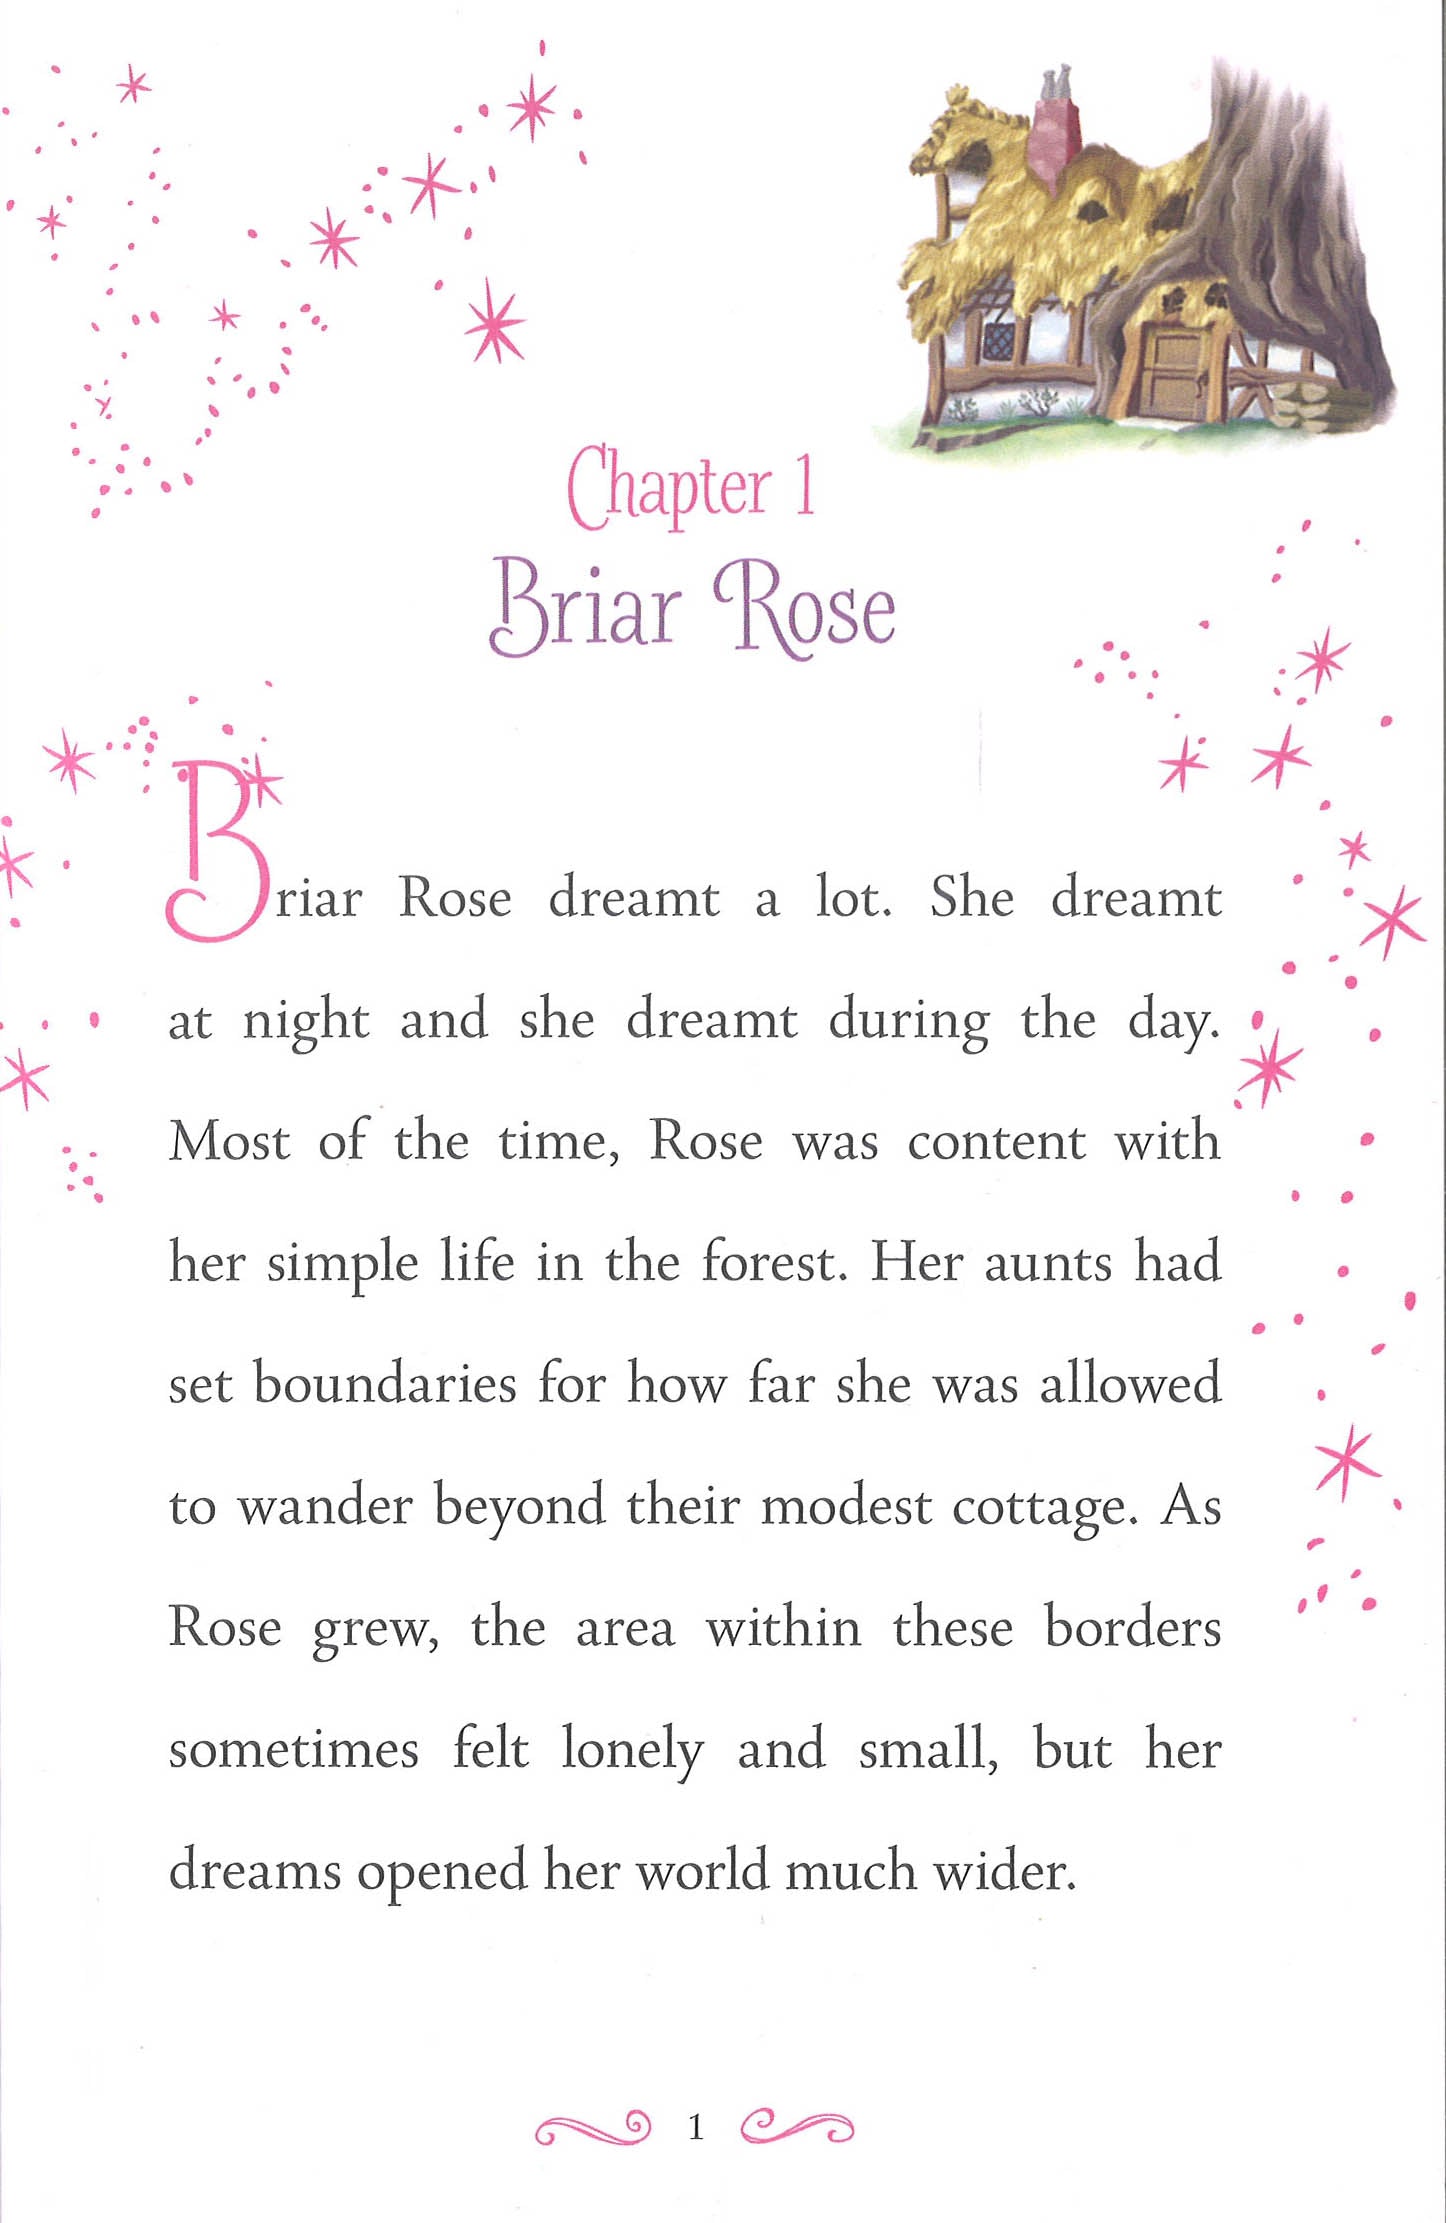 Disney Princess - Sleeping Beauty: Aurora Plays the Part (Chapter Book 128  Disney): unknown author: 9781789055320: : Books